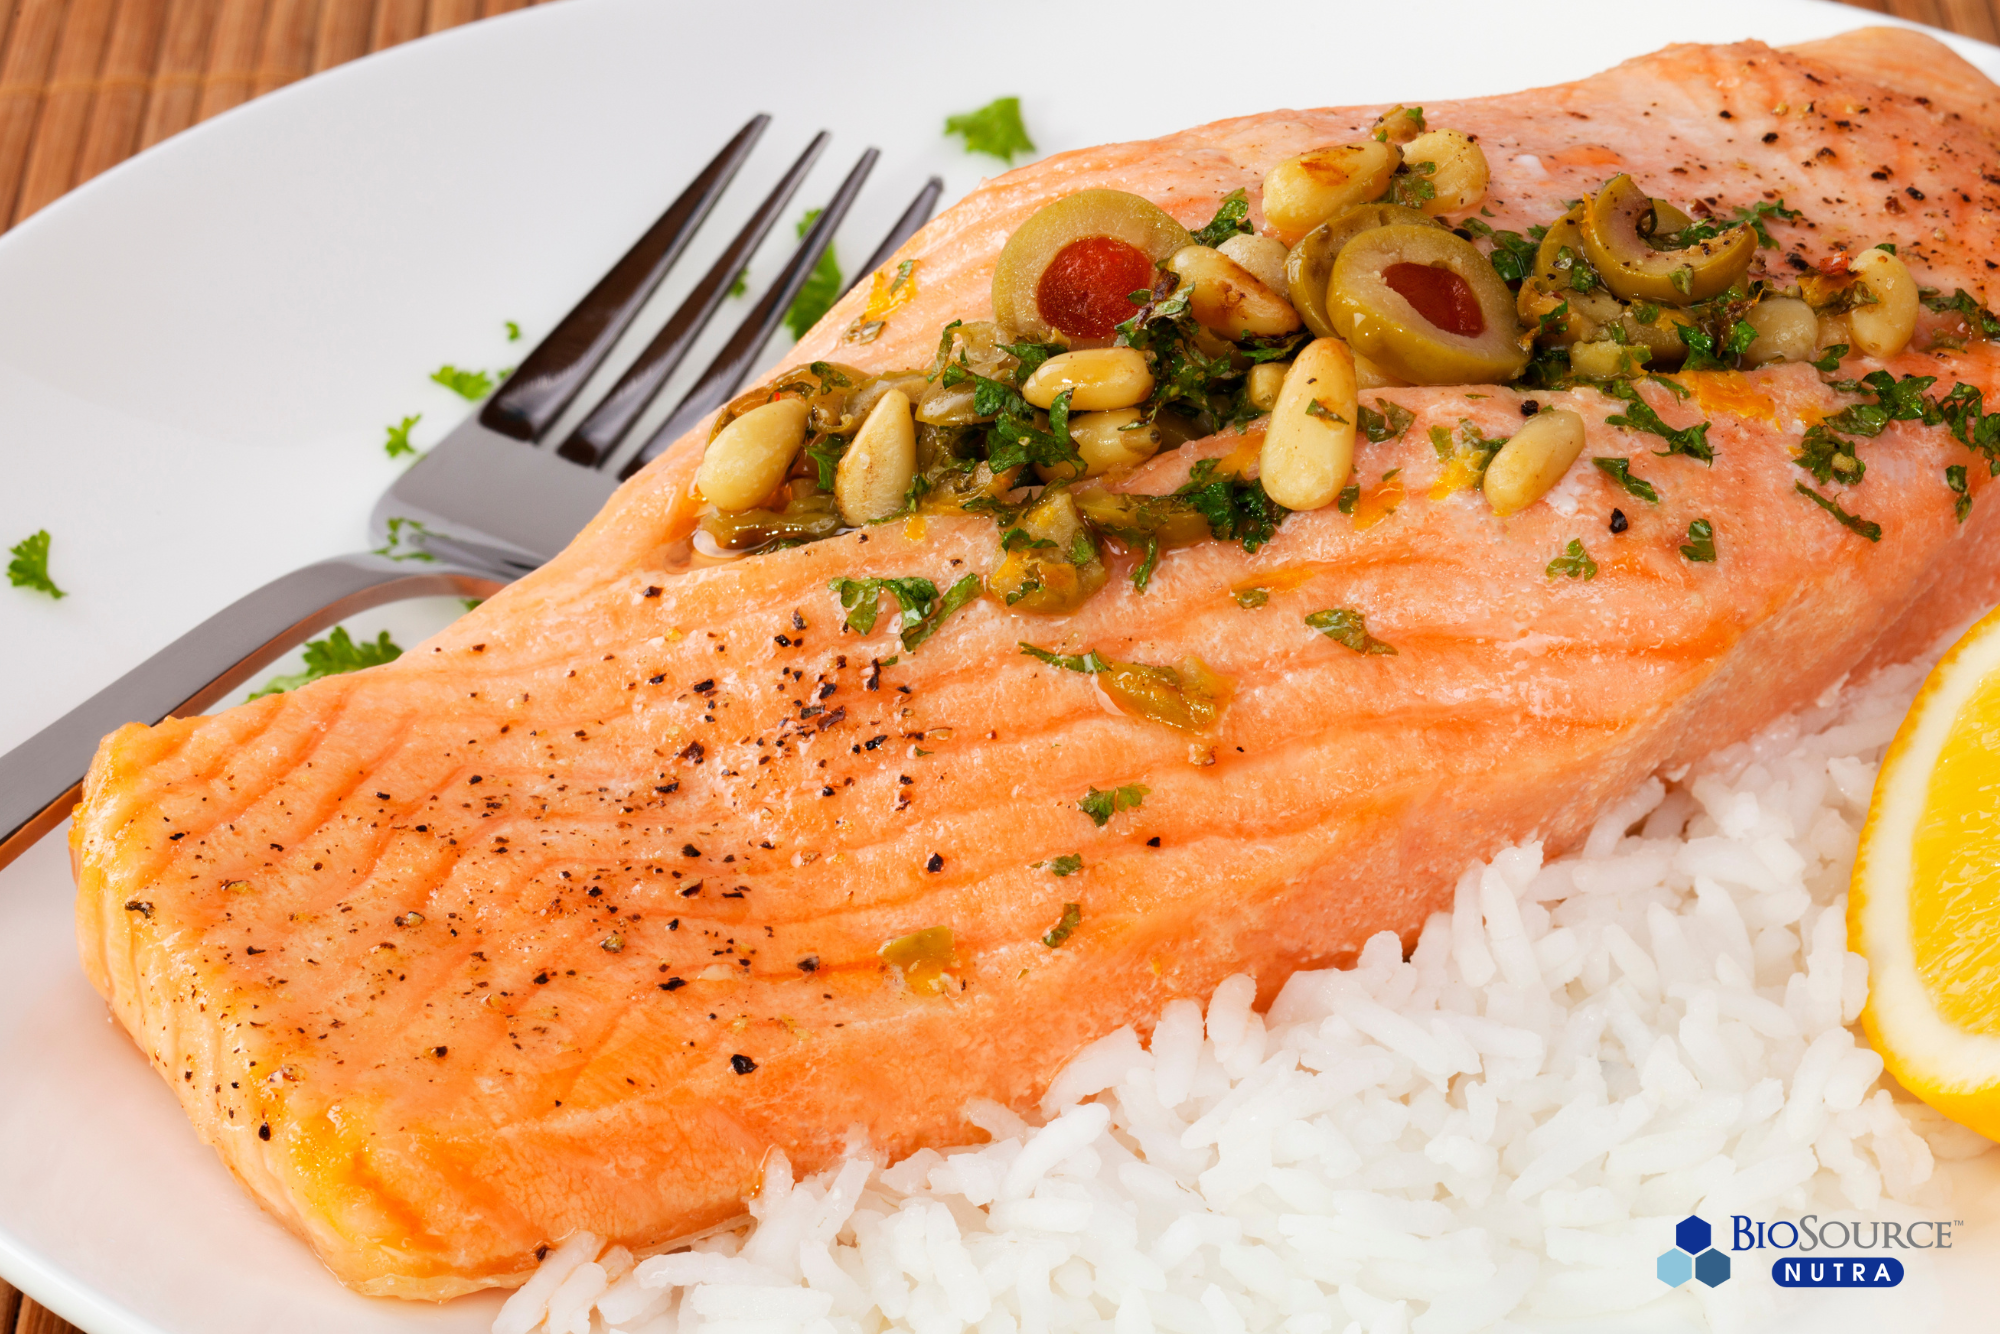 A salmon fillet on a bed of white rice